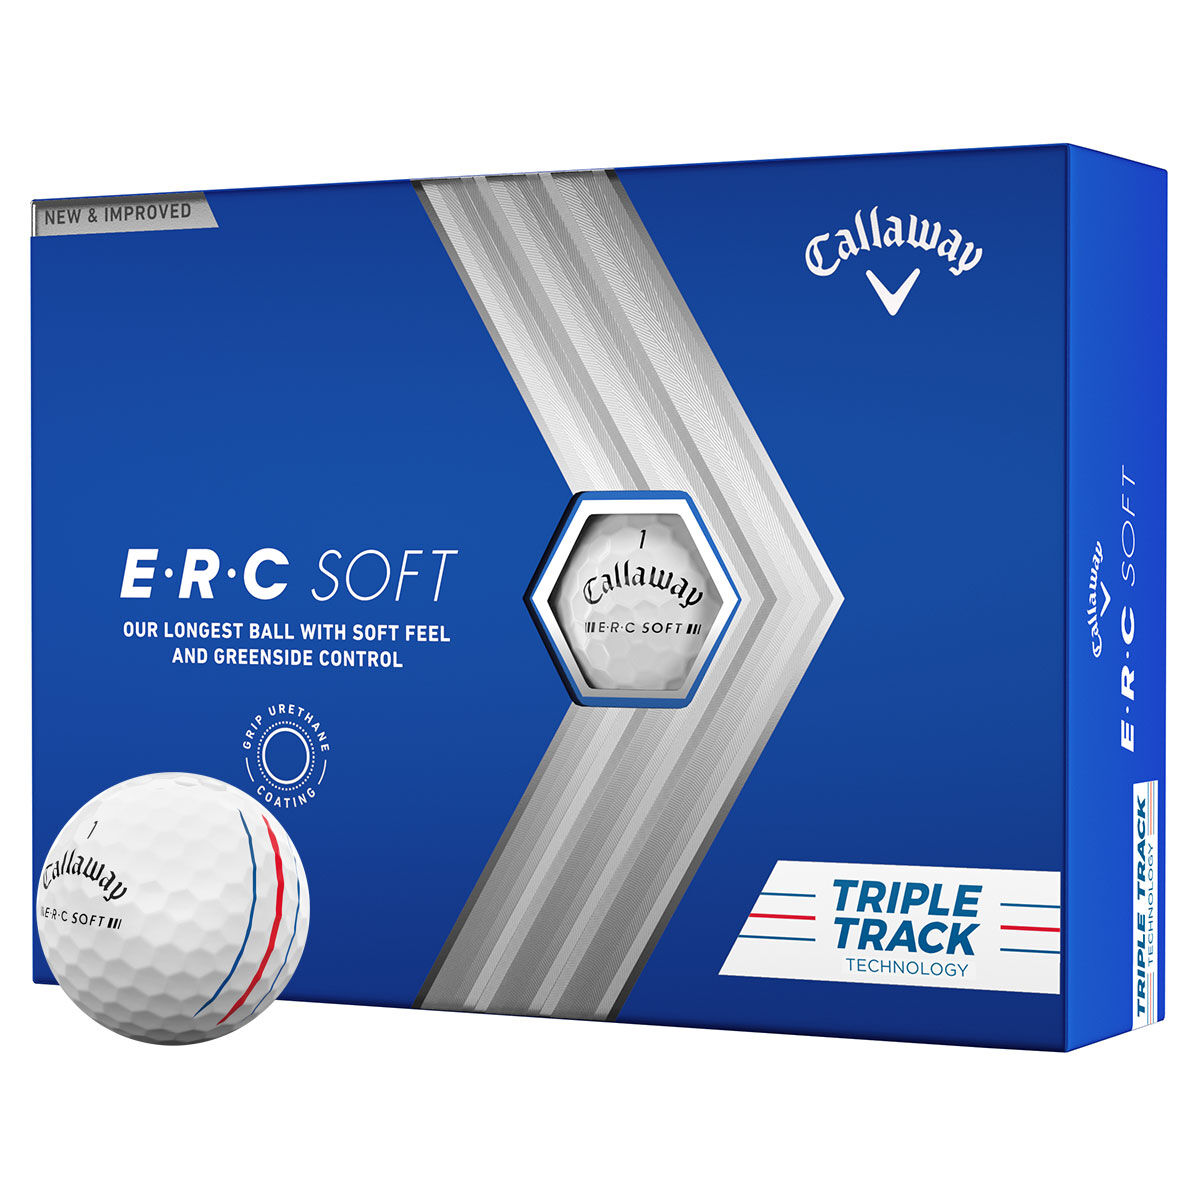 Callaway Golf Golf Ball, White E.R.C Soft Triple Track 12 Pack | American Golf, One Size - Father's Day Gift von Callaway Golf